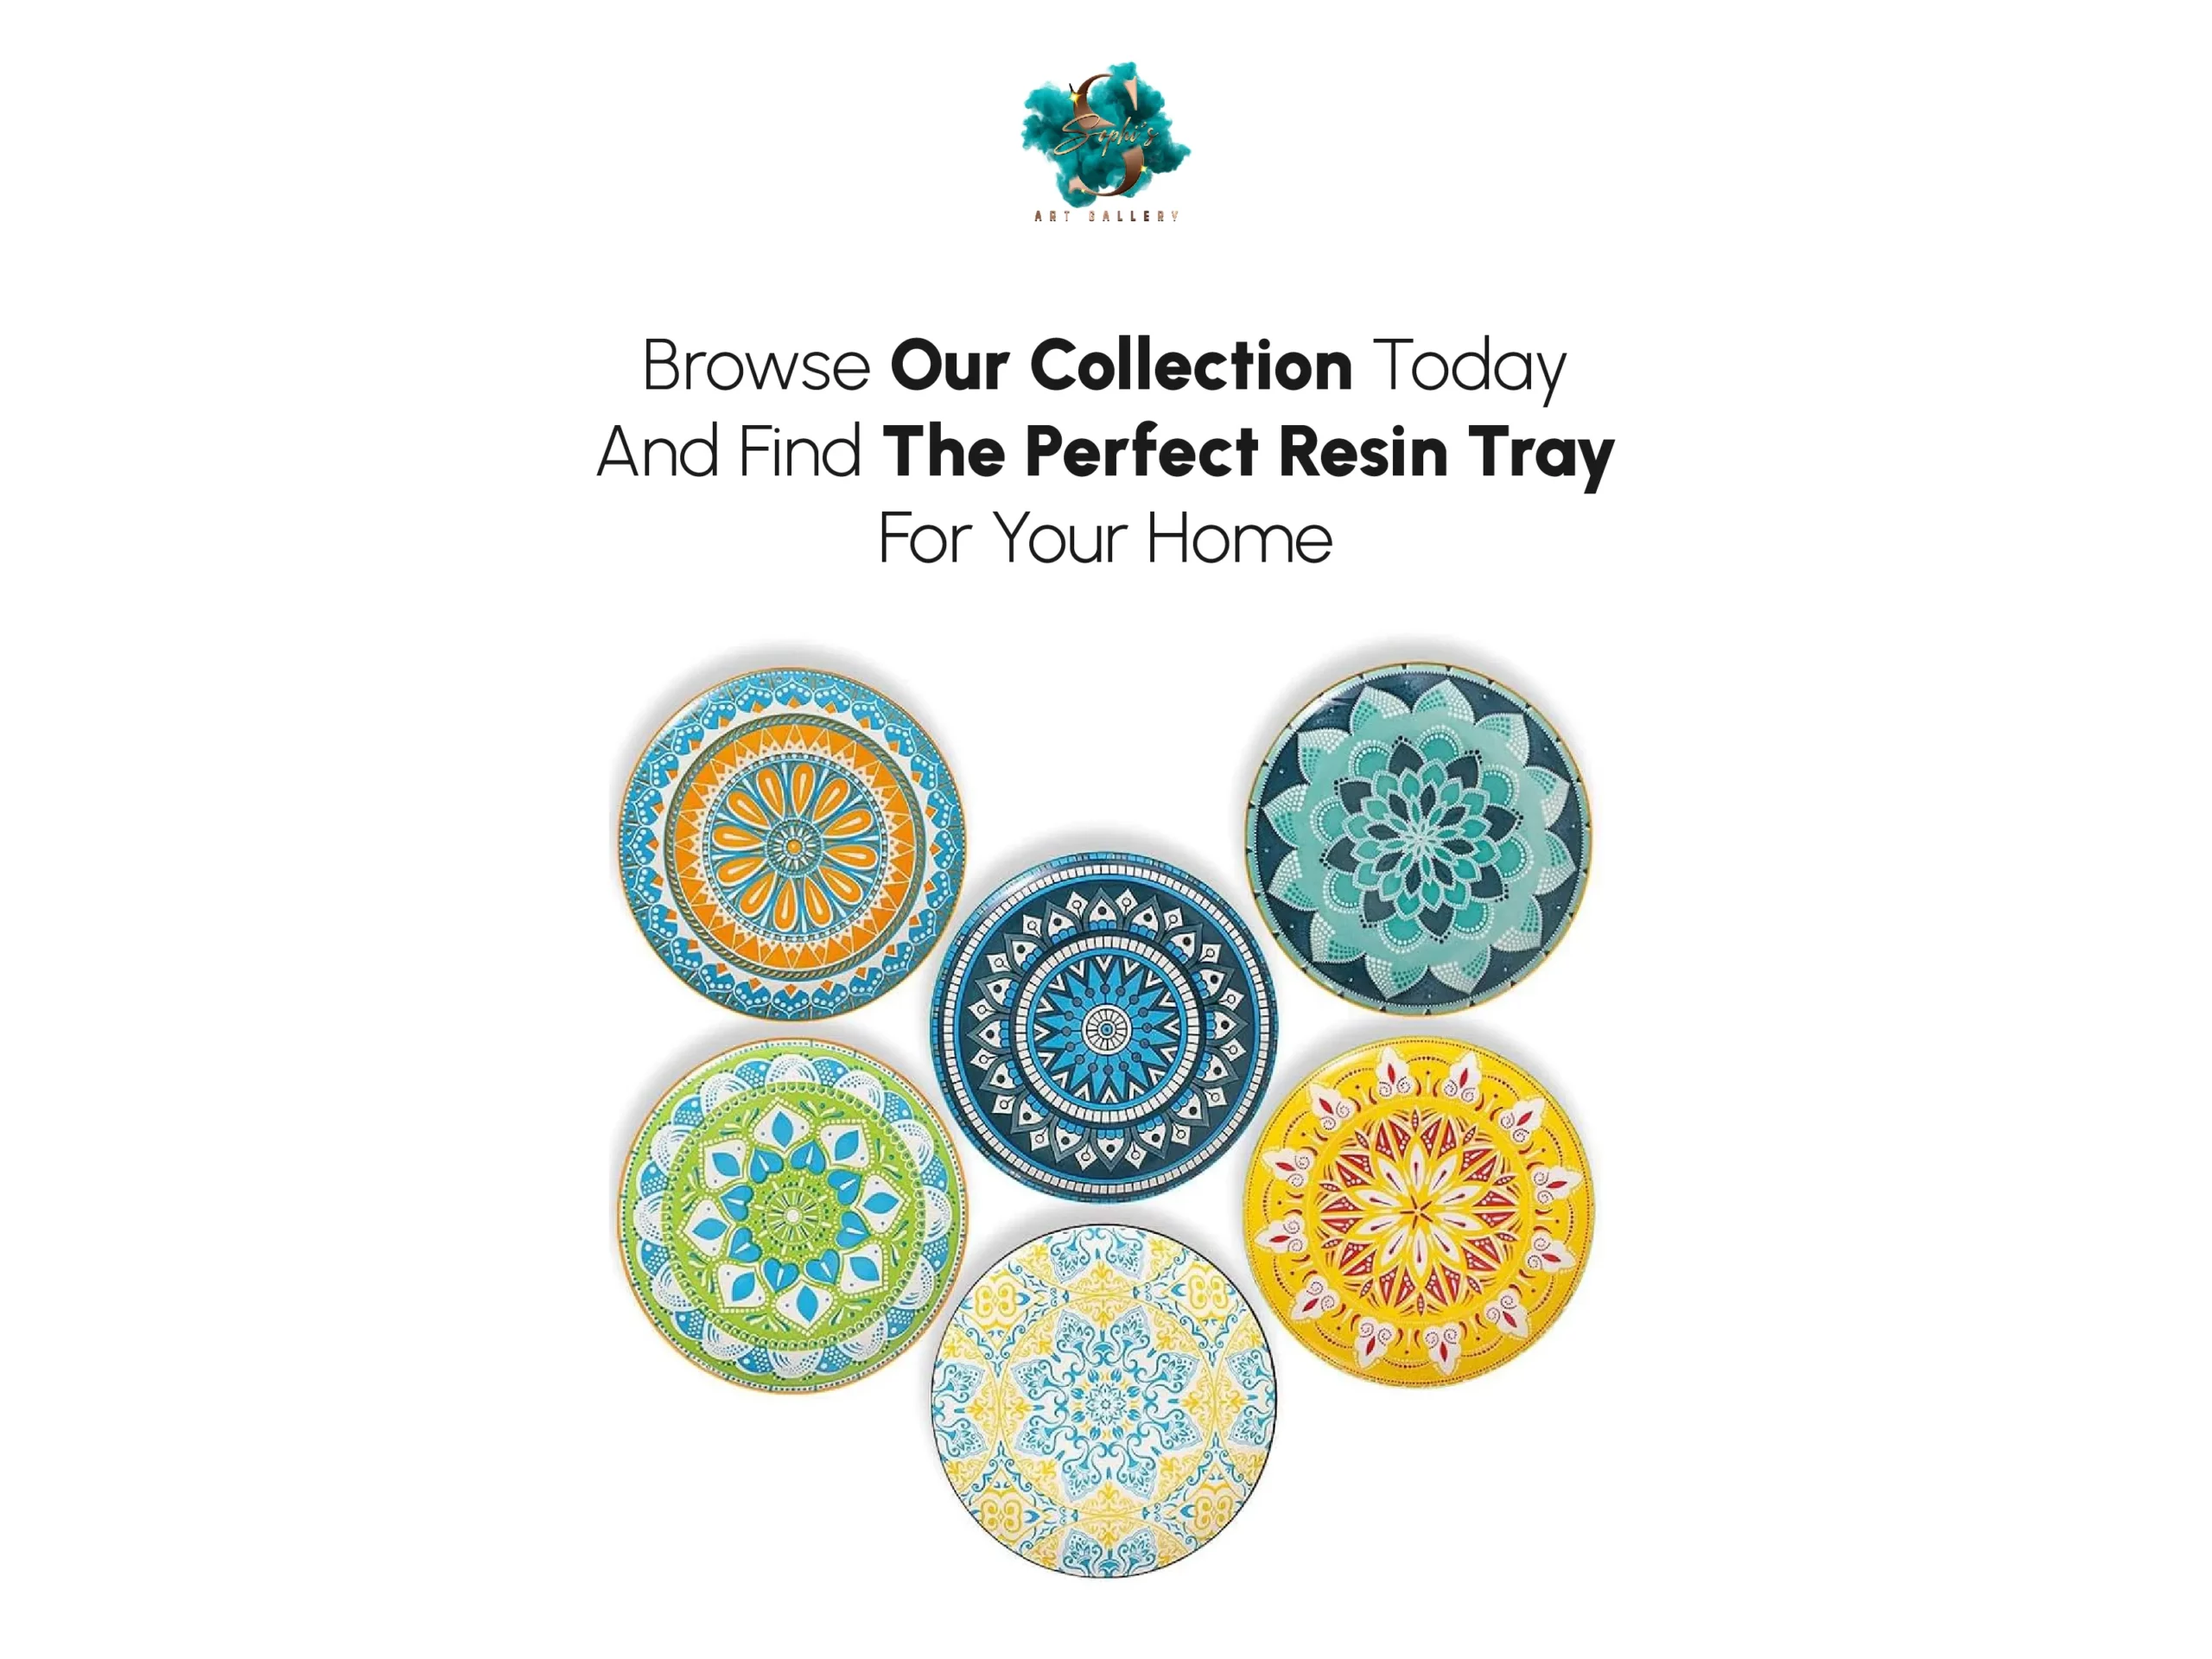 Browse Our Collection Today And Find The Perfect Resin Tray For Your Home